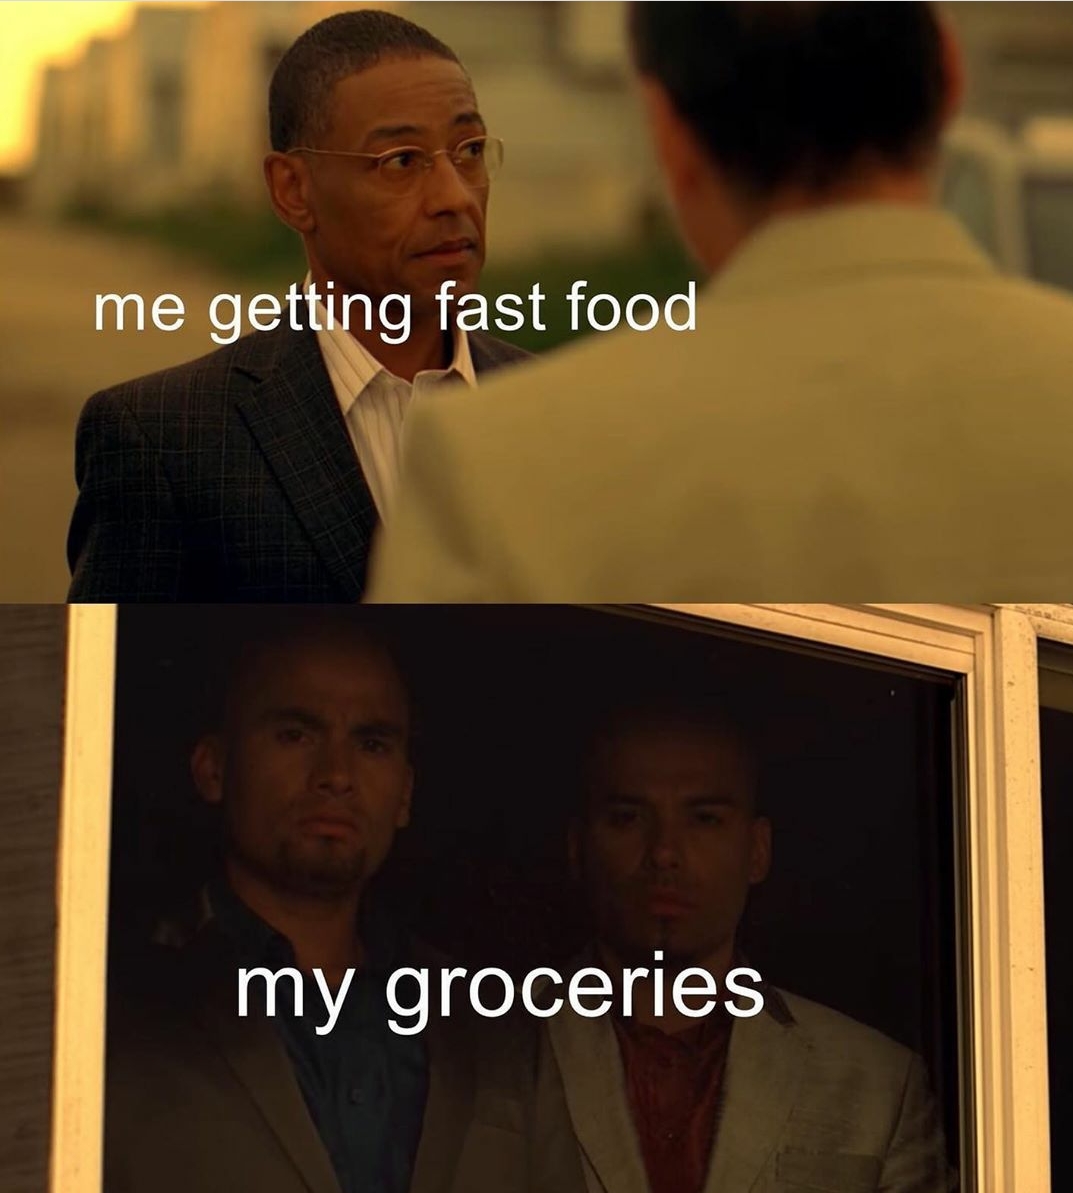 meme photo caption - me getting fast food my groceries